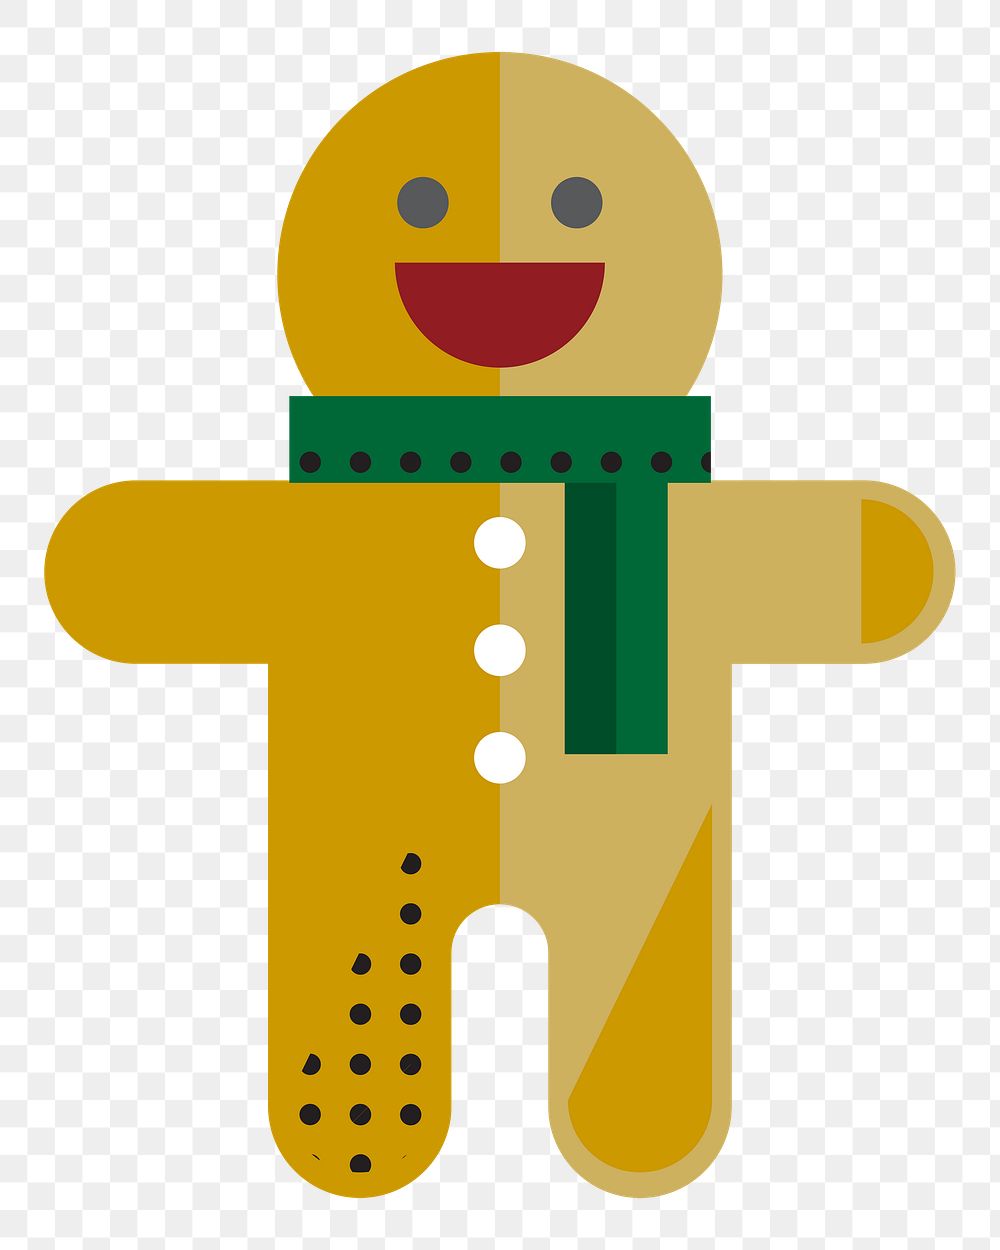 Merry Christmas png Icon, transparent background